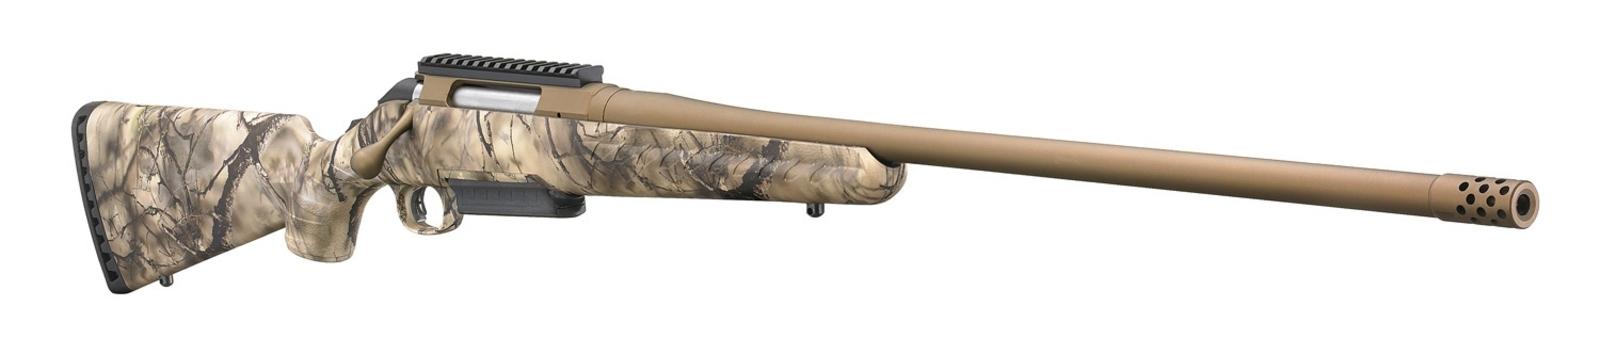 Ruger American® Rifle GO WILD® Camo Bolt-Action Rifle Model 36948